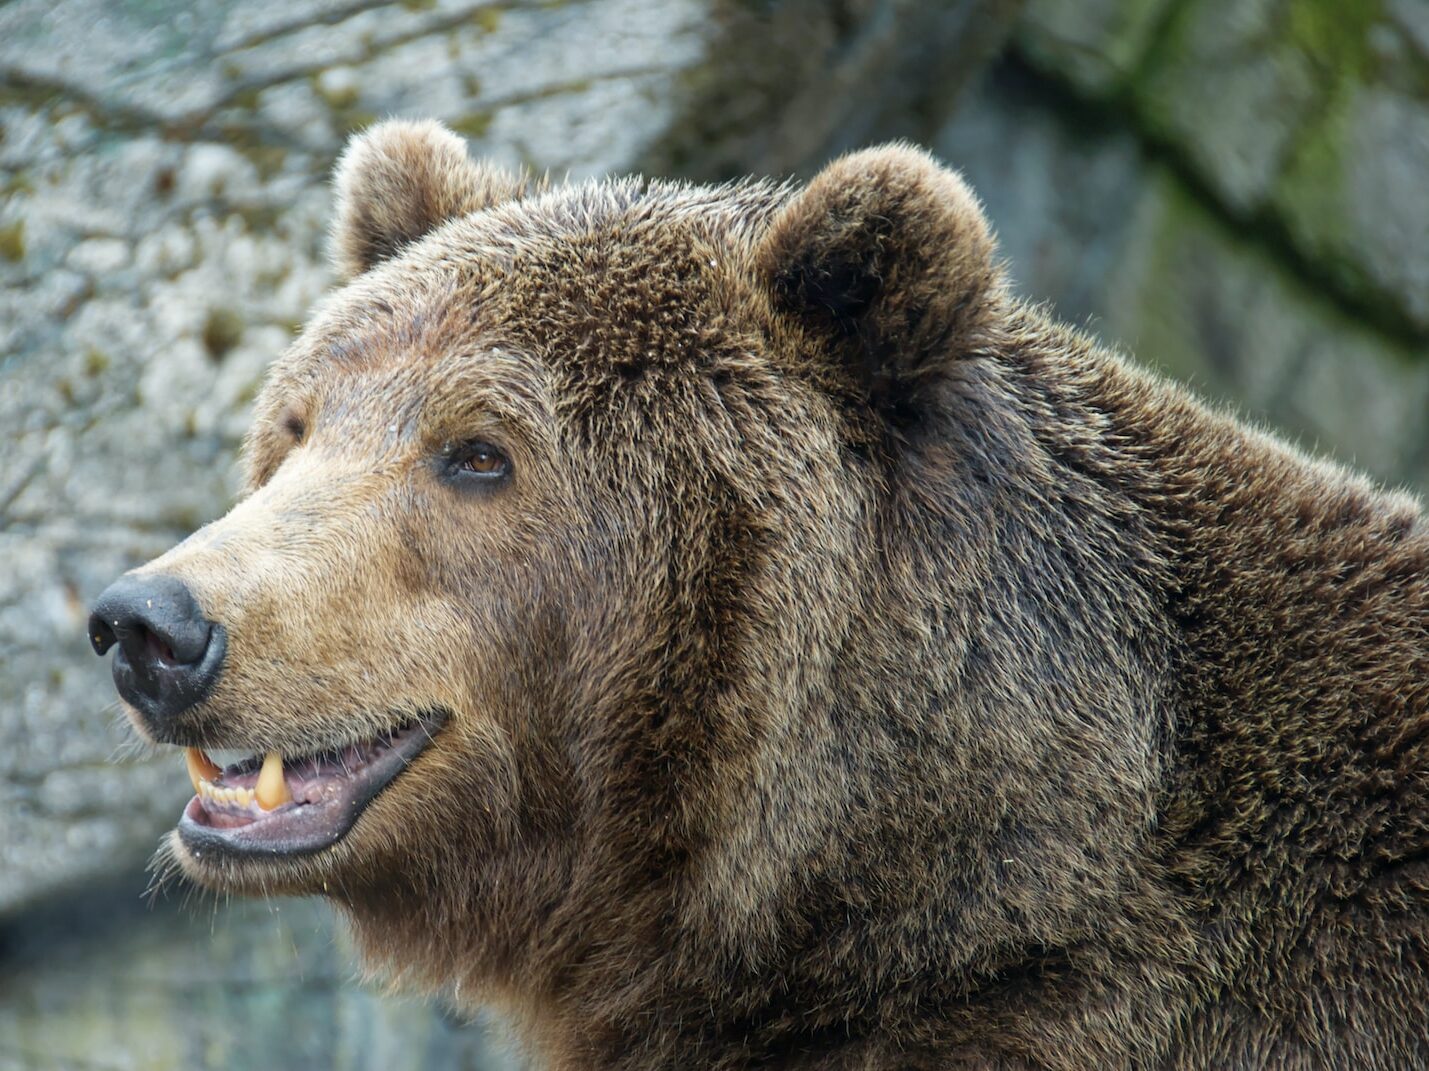 a large brown bear standing next to a stone wall